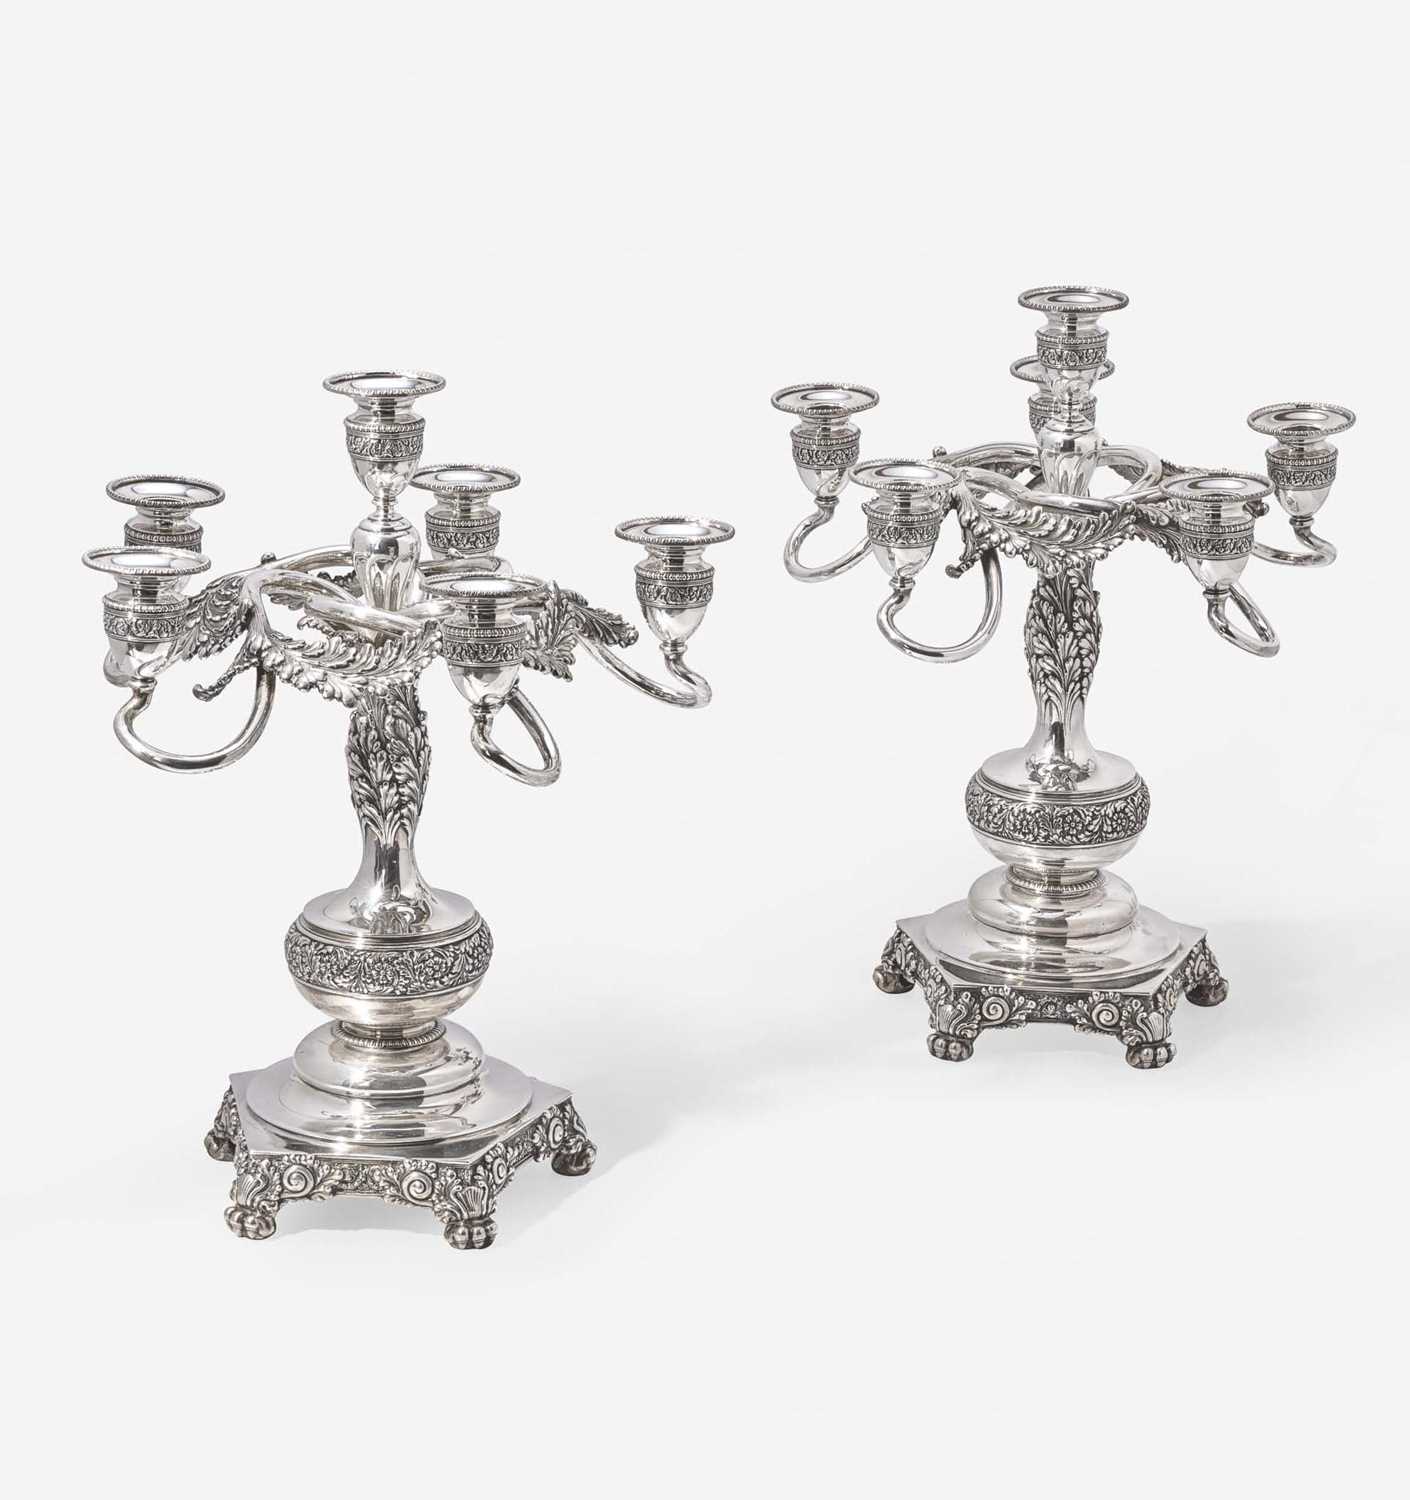 Lot 152 - An American Pair of Sterling Silver Six-Light Candelabra